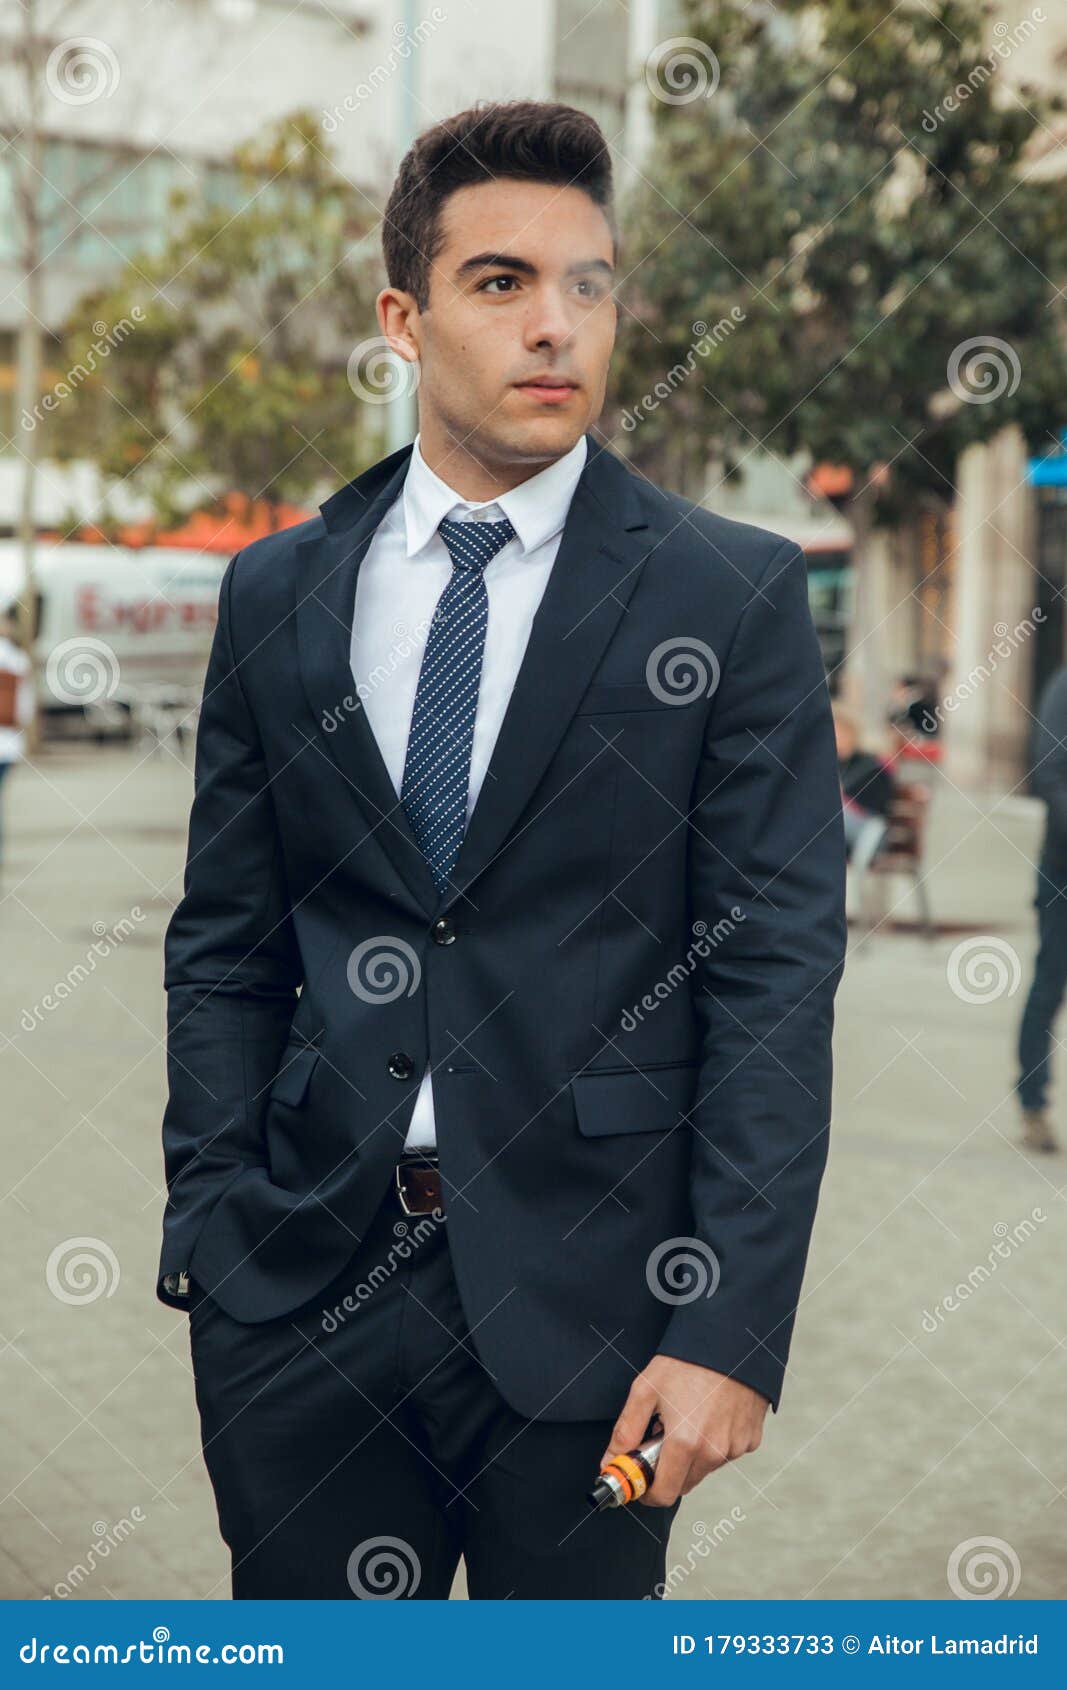 boy in suit smoking with vaper